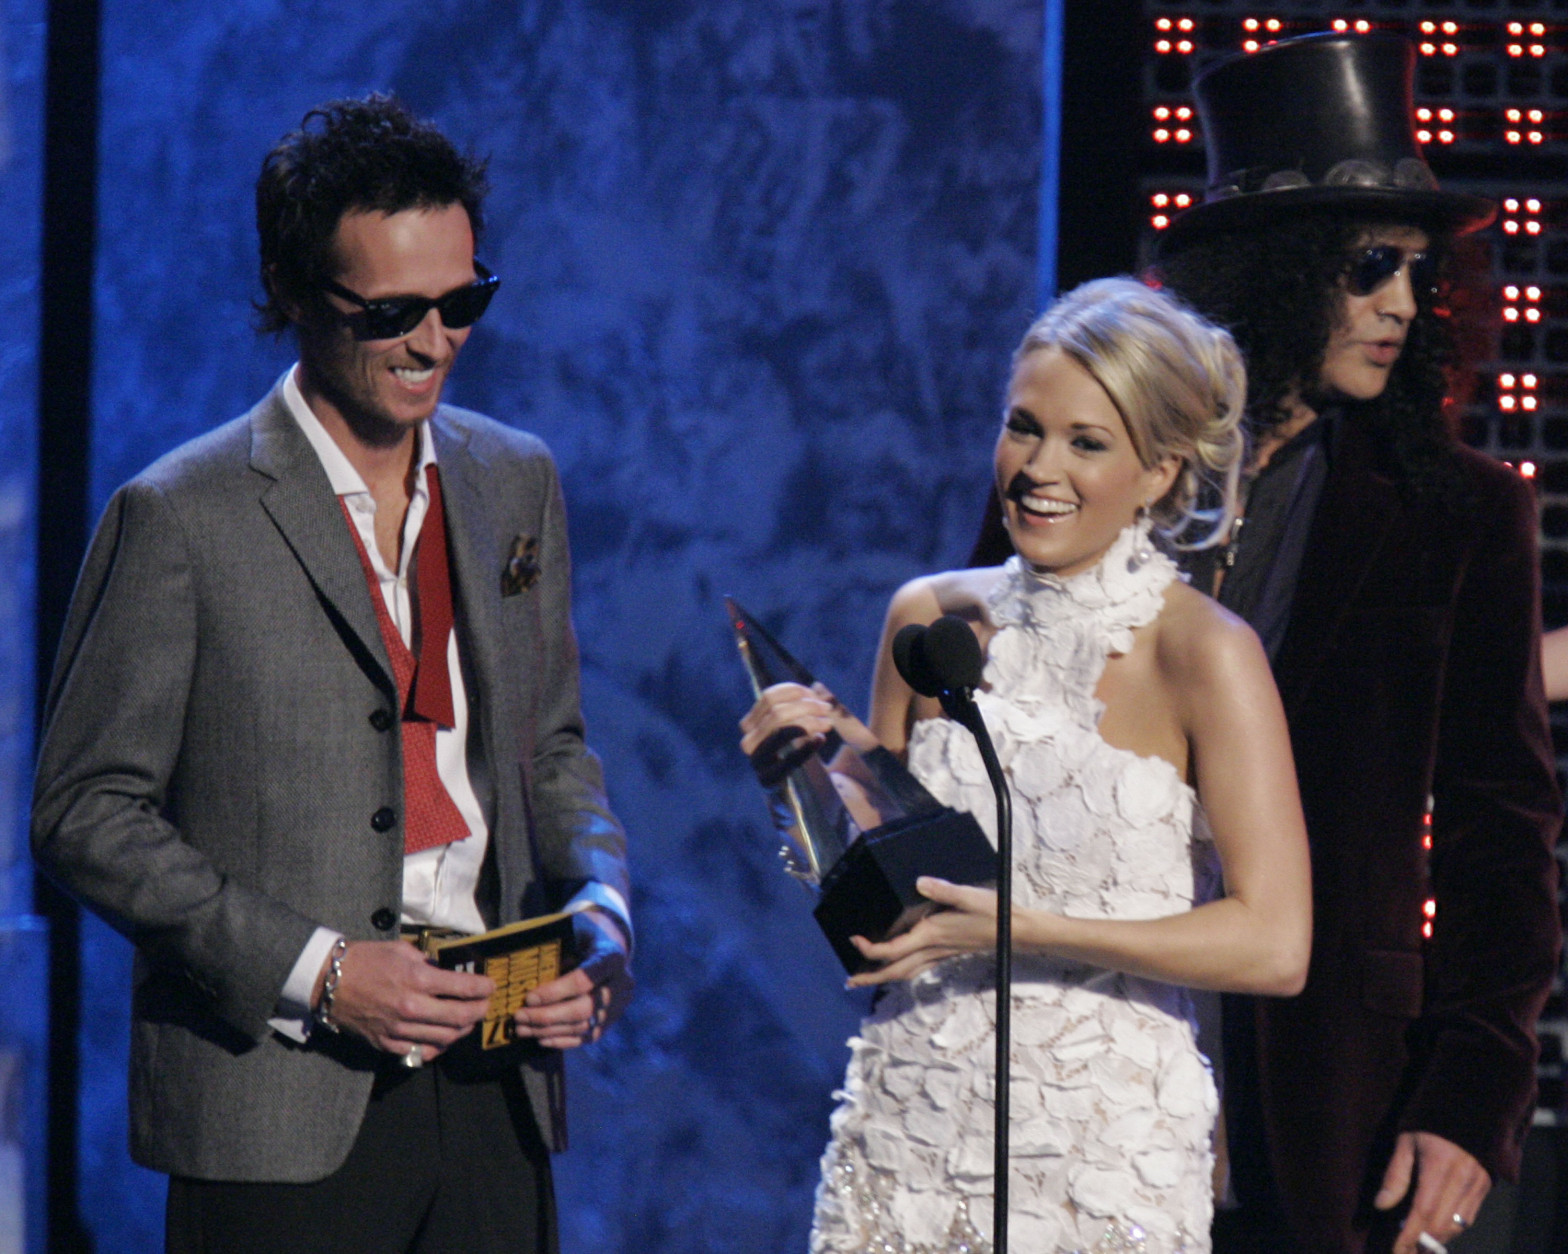 Scott Weiland, left, presents Carrie Underwood with the T-Mobile text in award in the background at the American Music Awards in Los Angeles on Sunday, Nov. 18, 2007. Slash is in the background. (AP Photo/Mark J. Terrill)